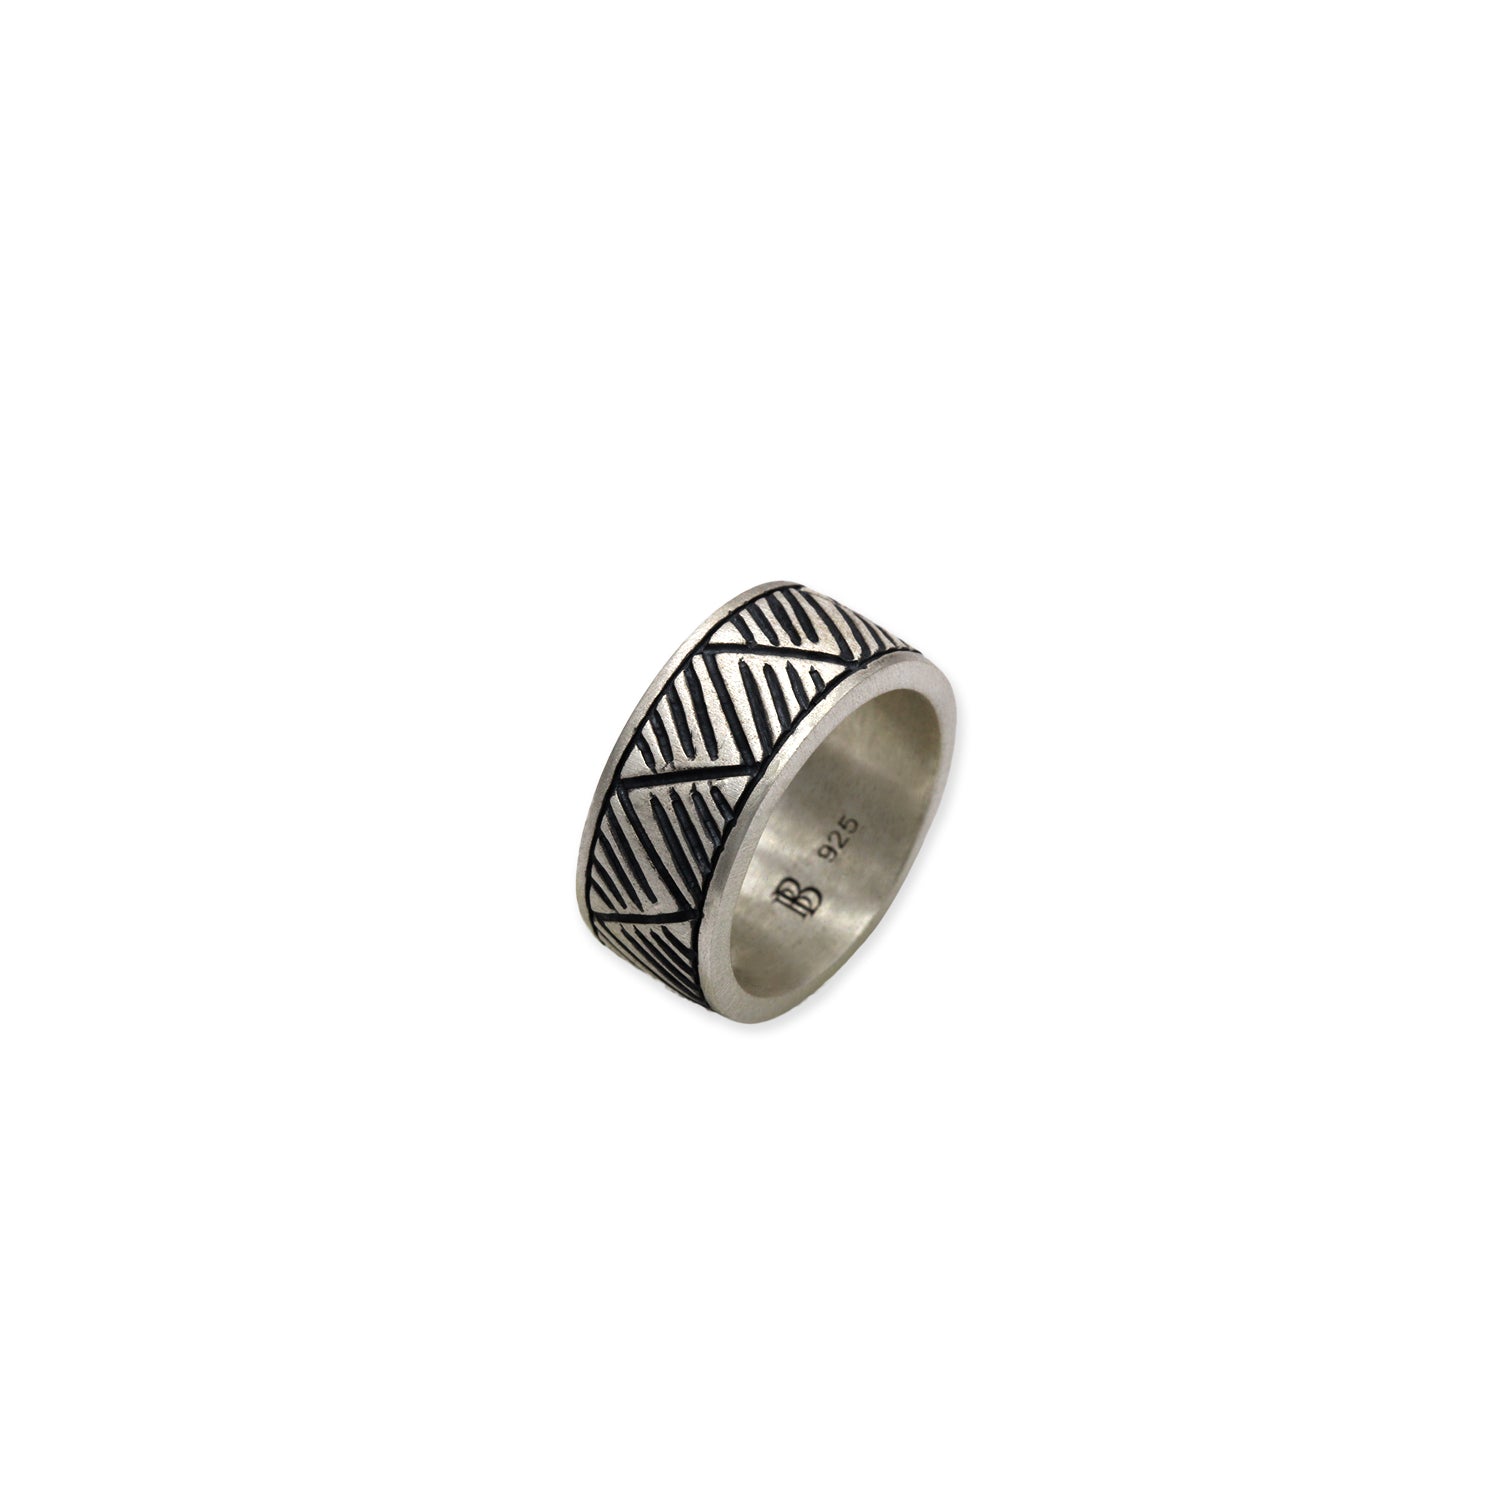 Aztec Tribe Ring, in 925 sterling silver